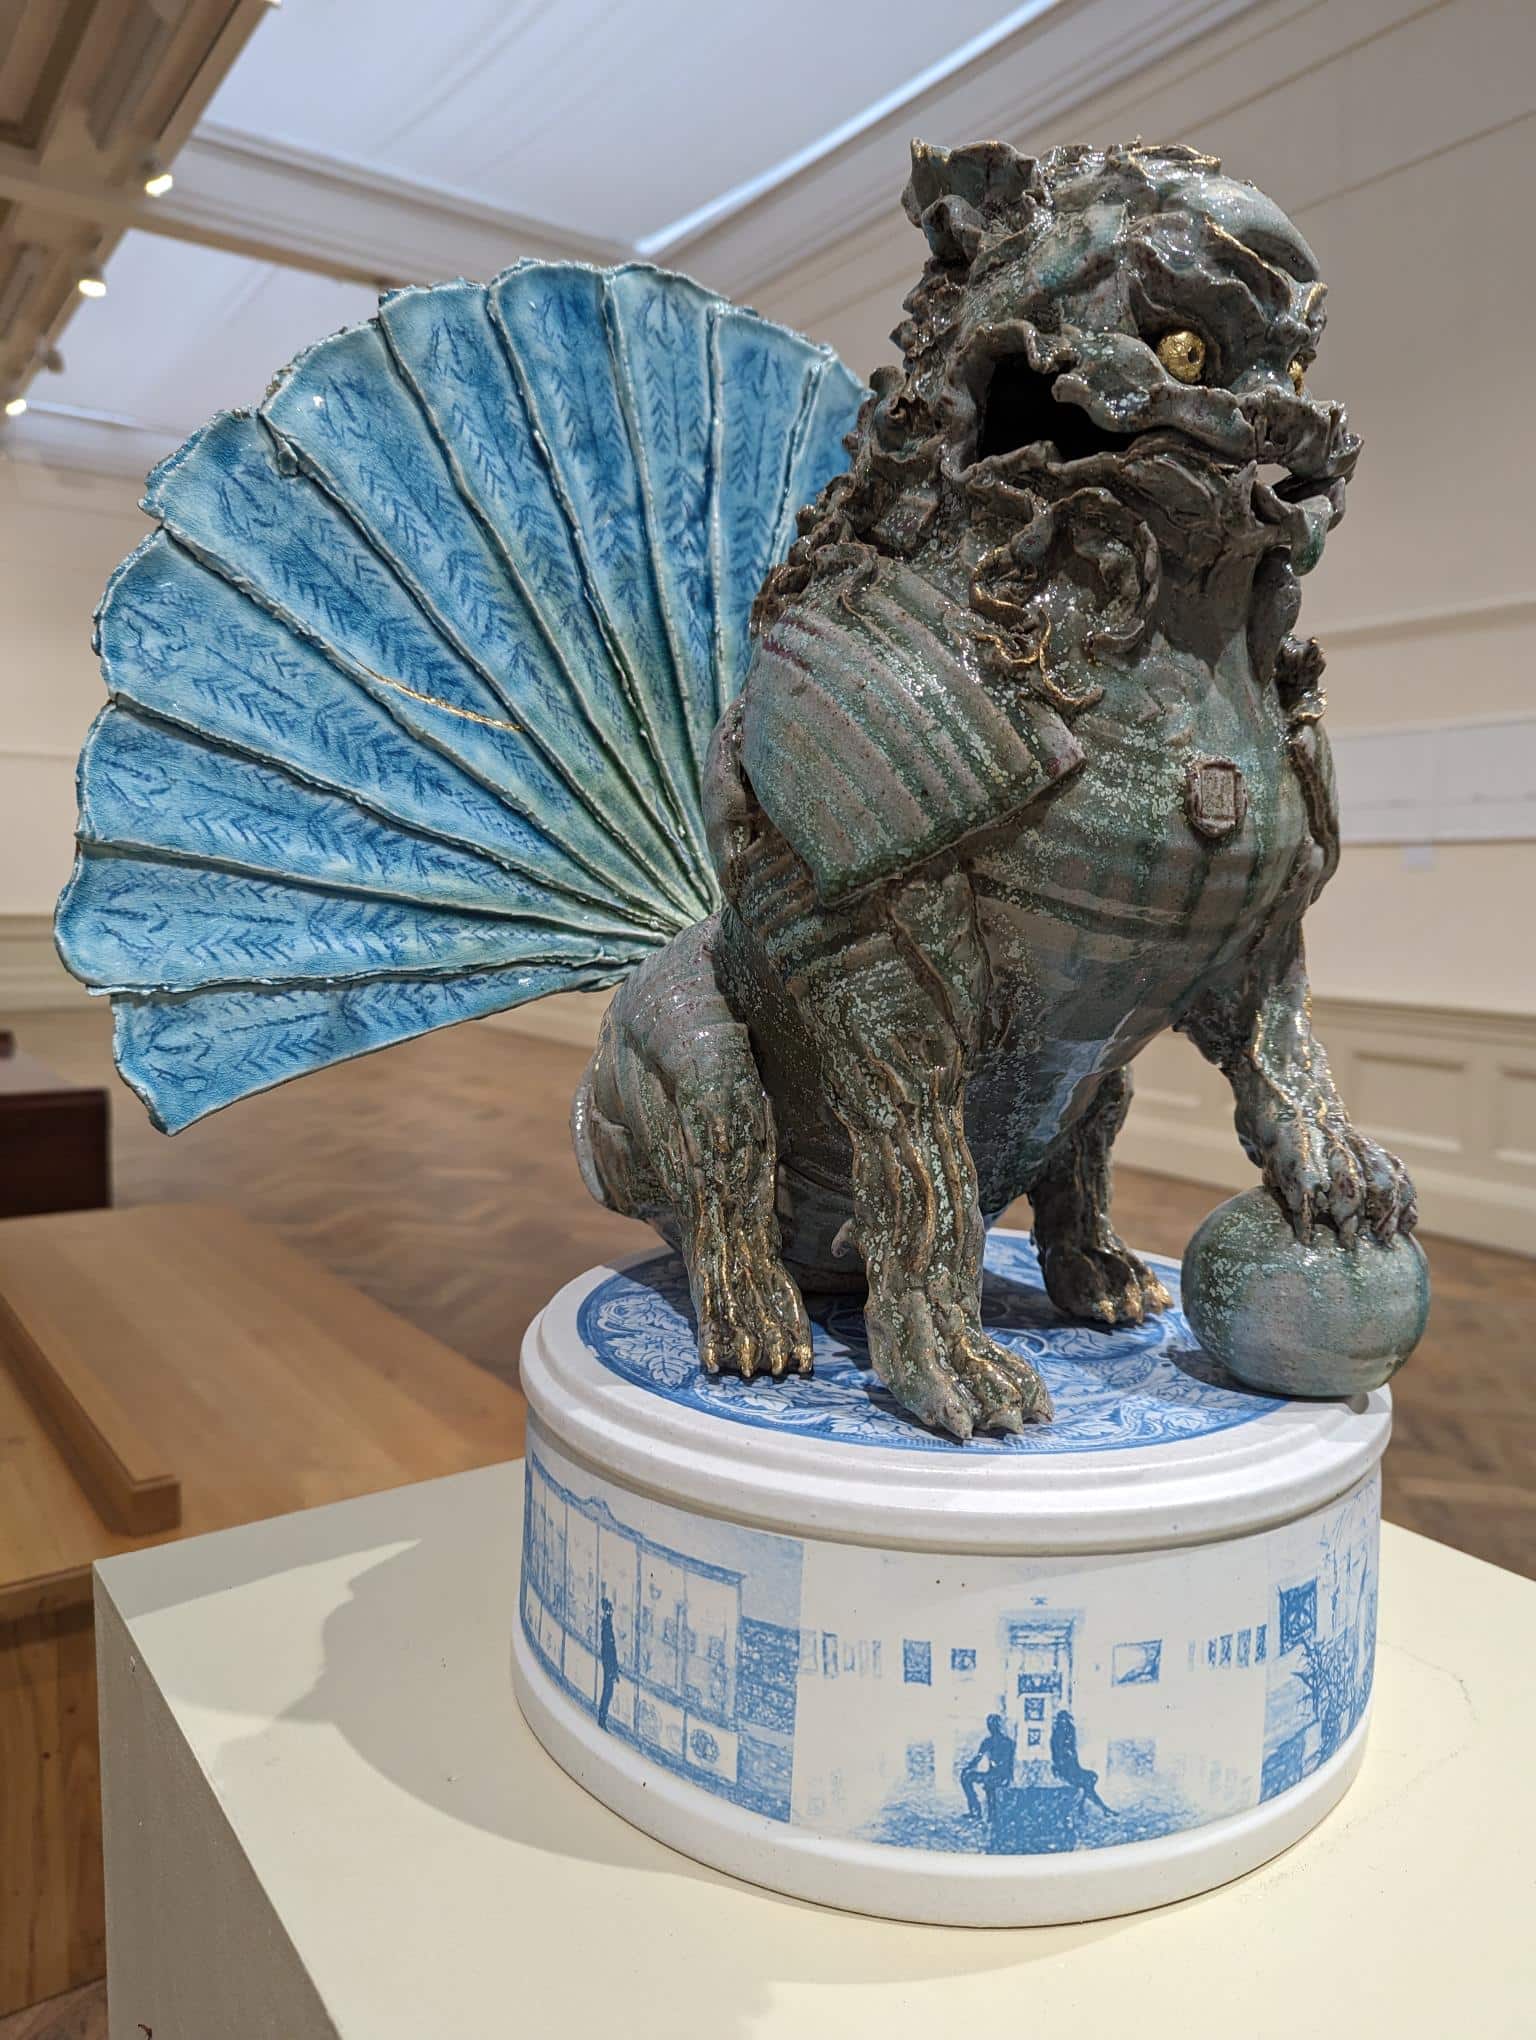 Photograph of Jacob Chan's Foo Dog, a grey sculpture, we ca see it sitting on its white-and-blue base and also its blue fan-tail.